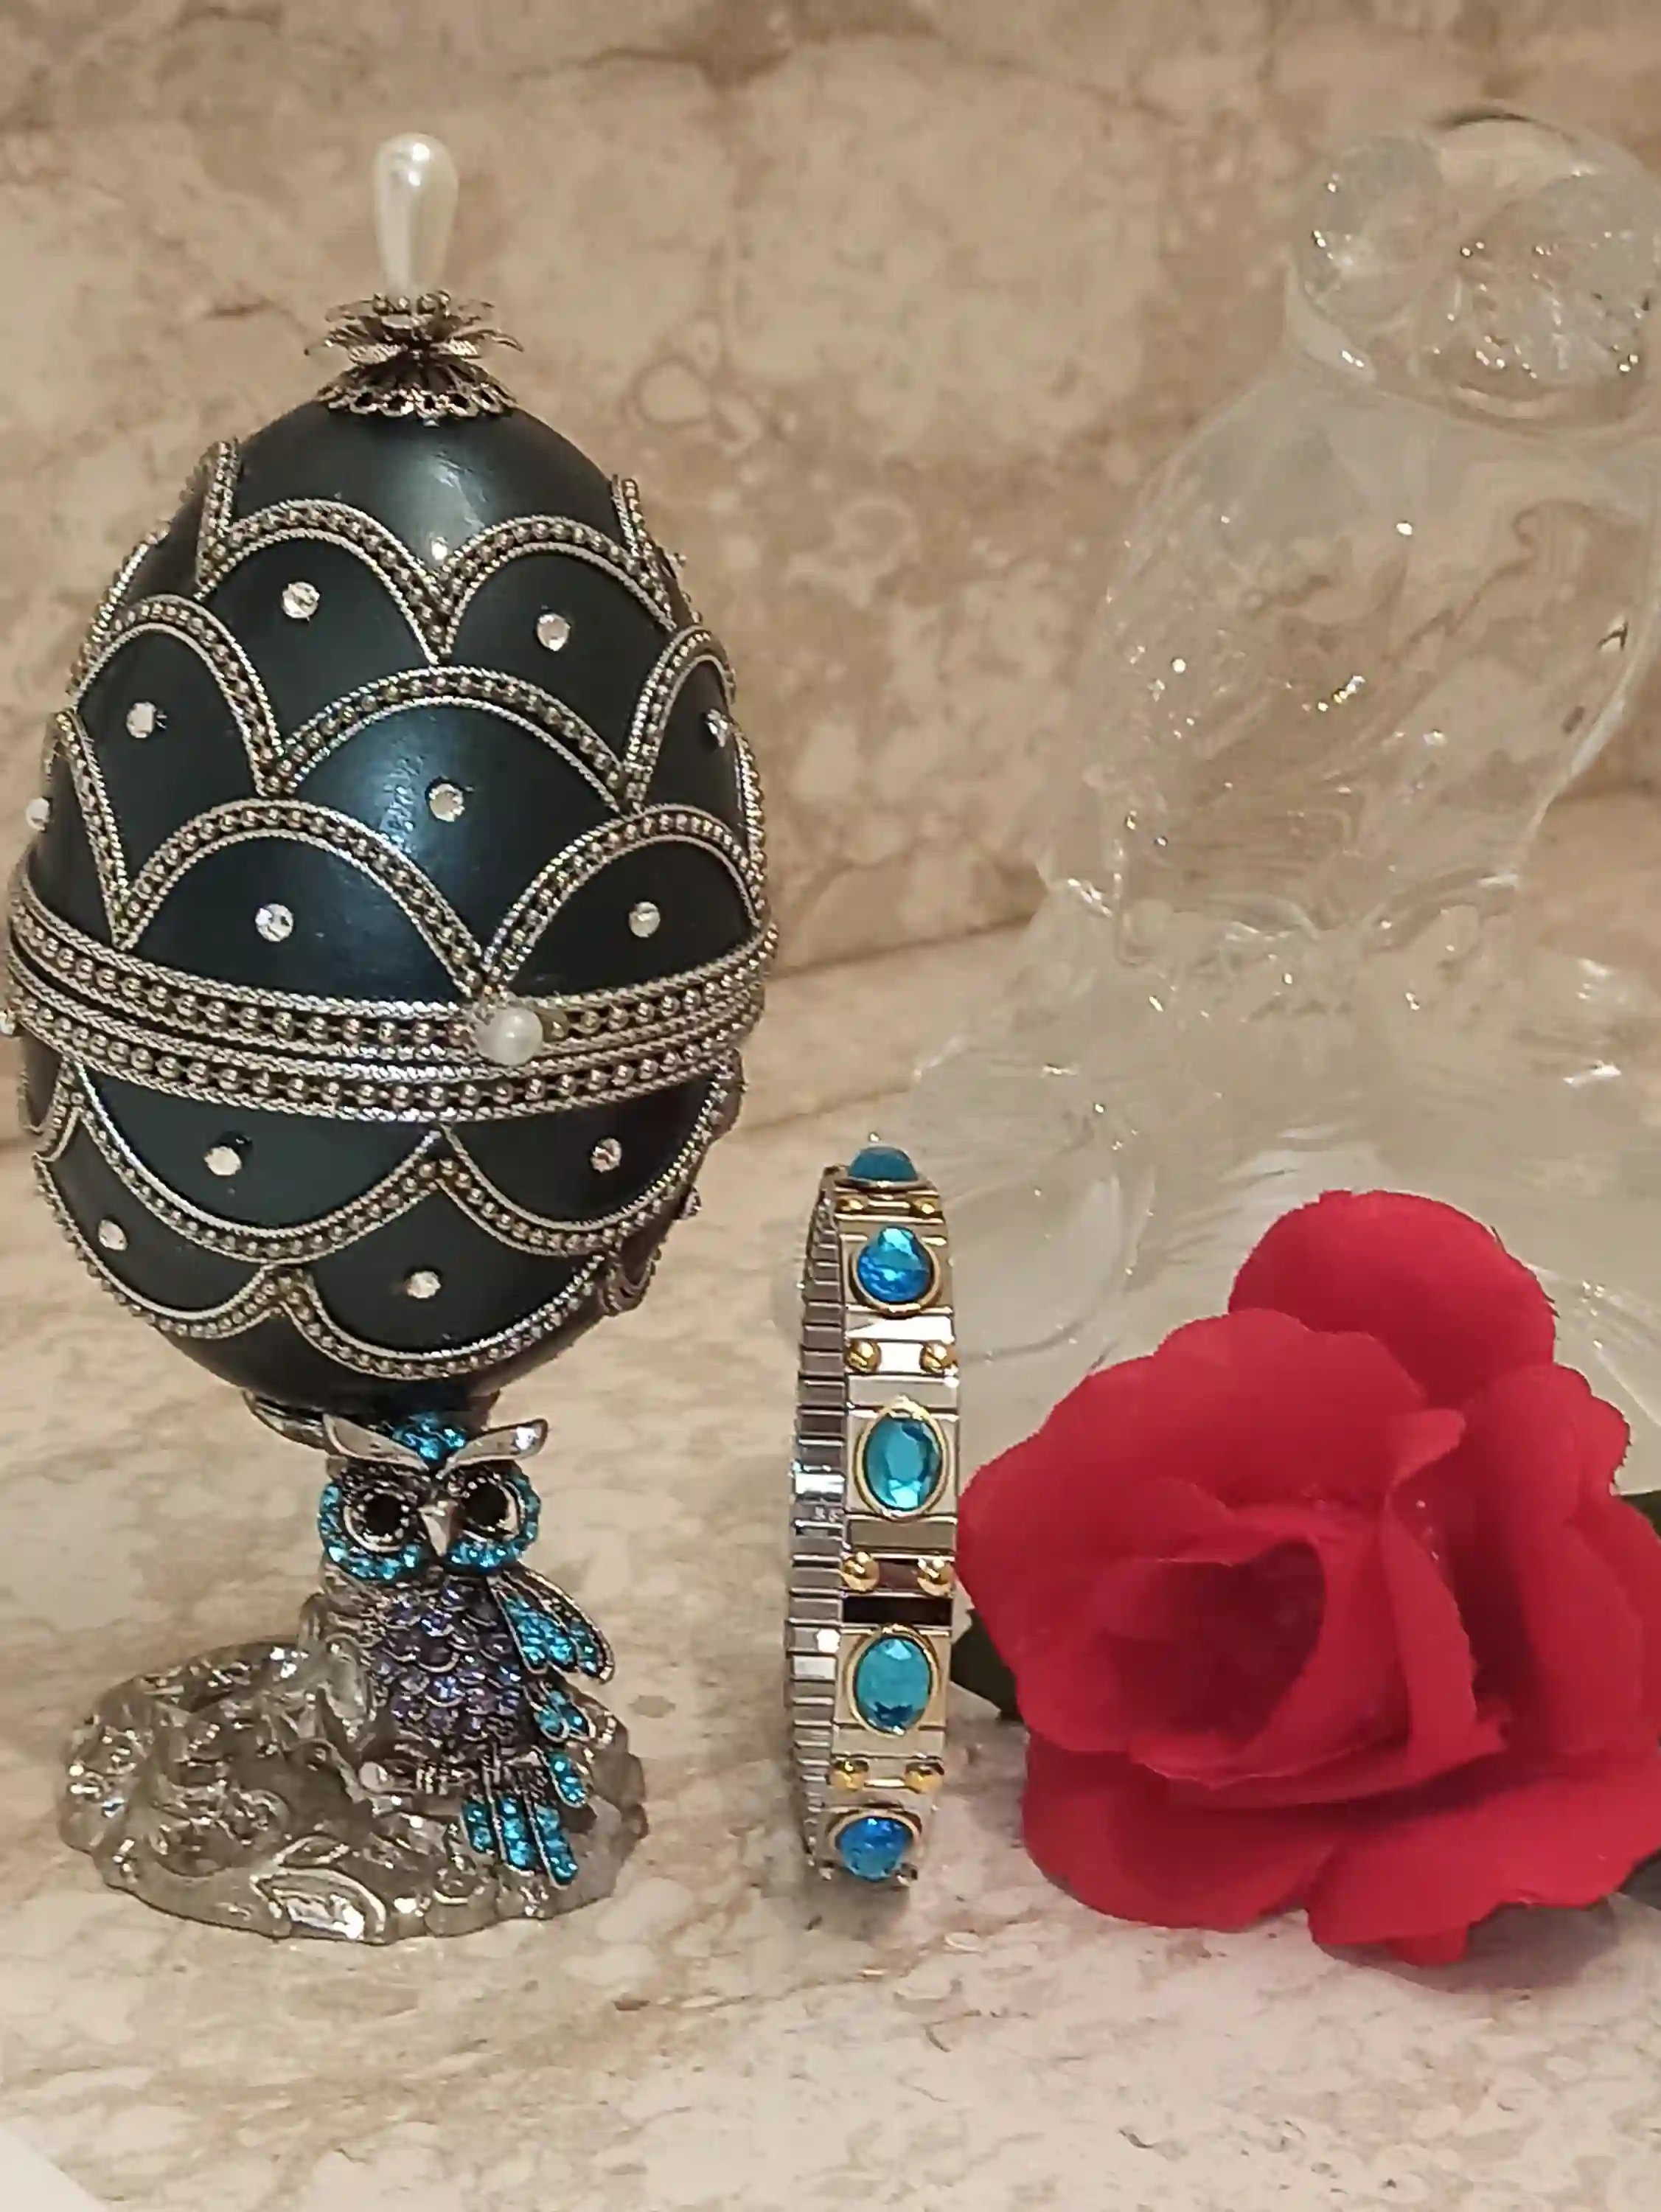 Christmas Gift for women Mom Wife Mother Her Sister Xmas Gift /ONLYONEOF/Musical Faberge Egg, Austrian Crystal Diamonds Real Egg Jewelry Box 